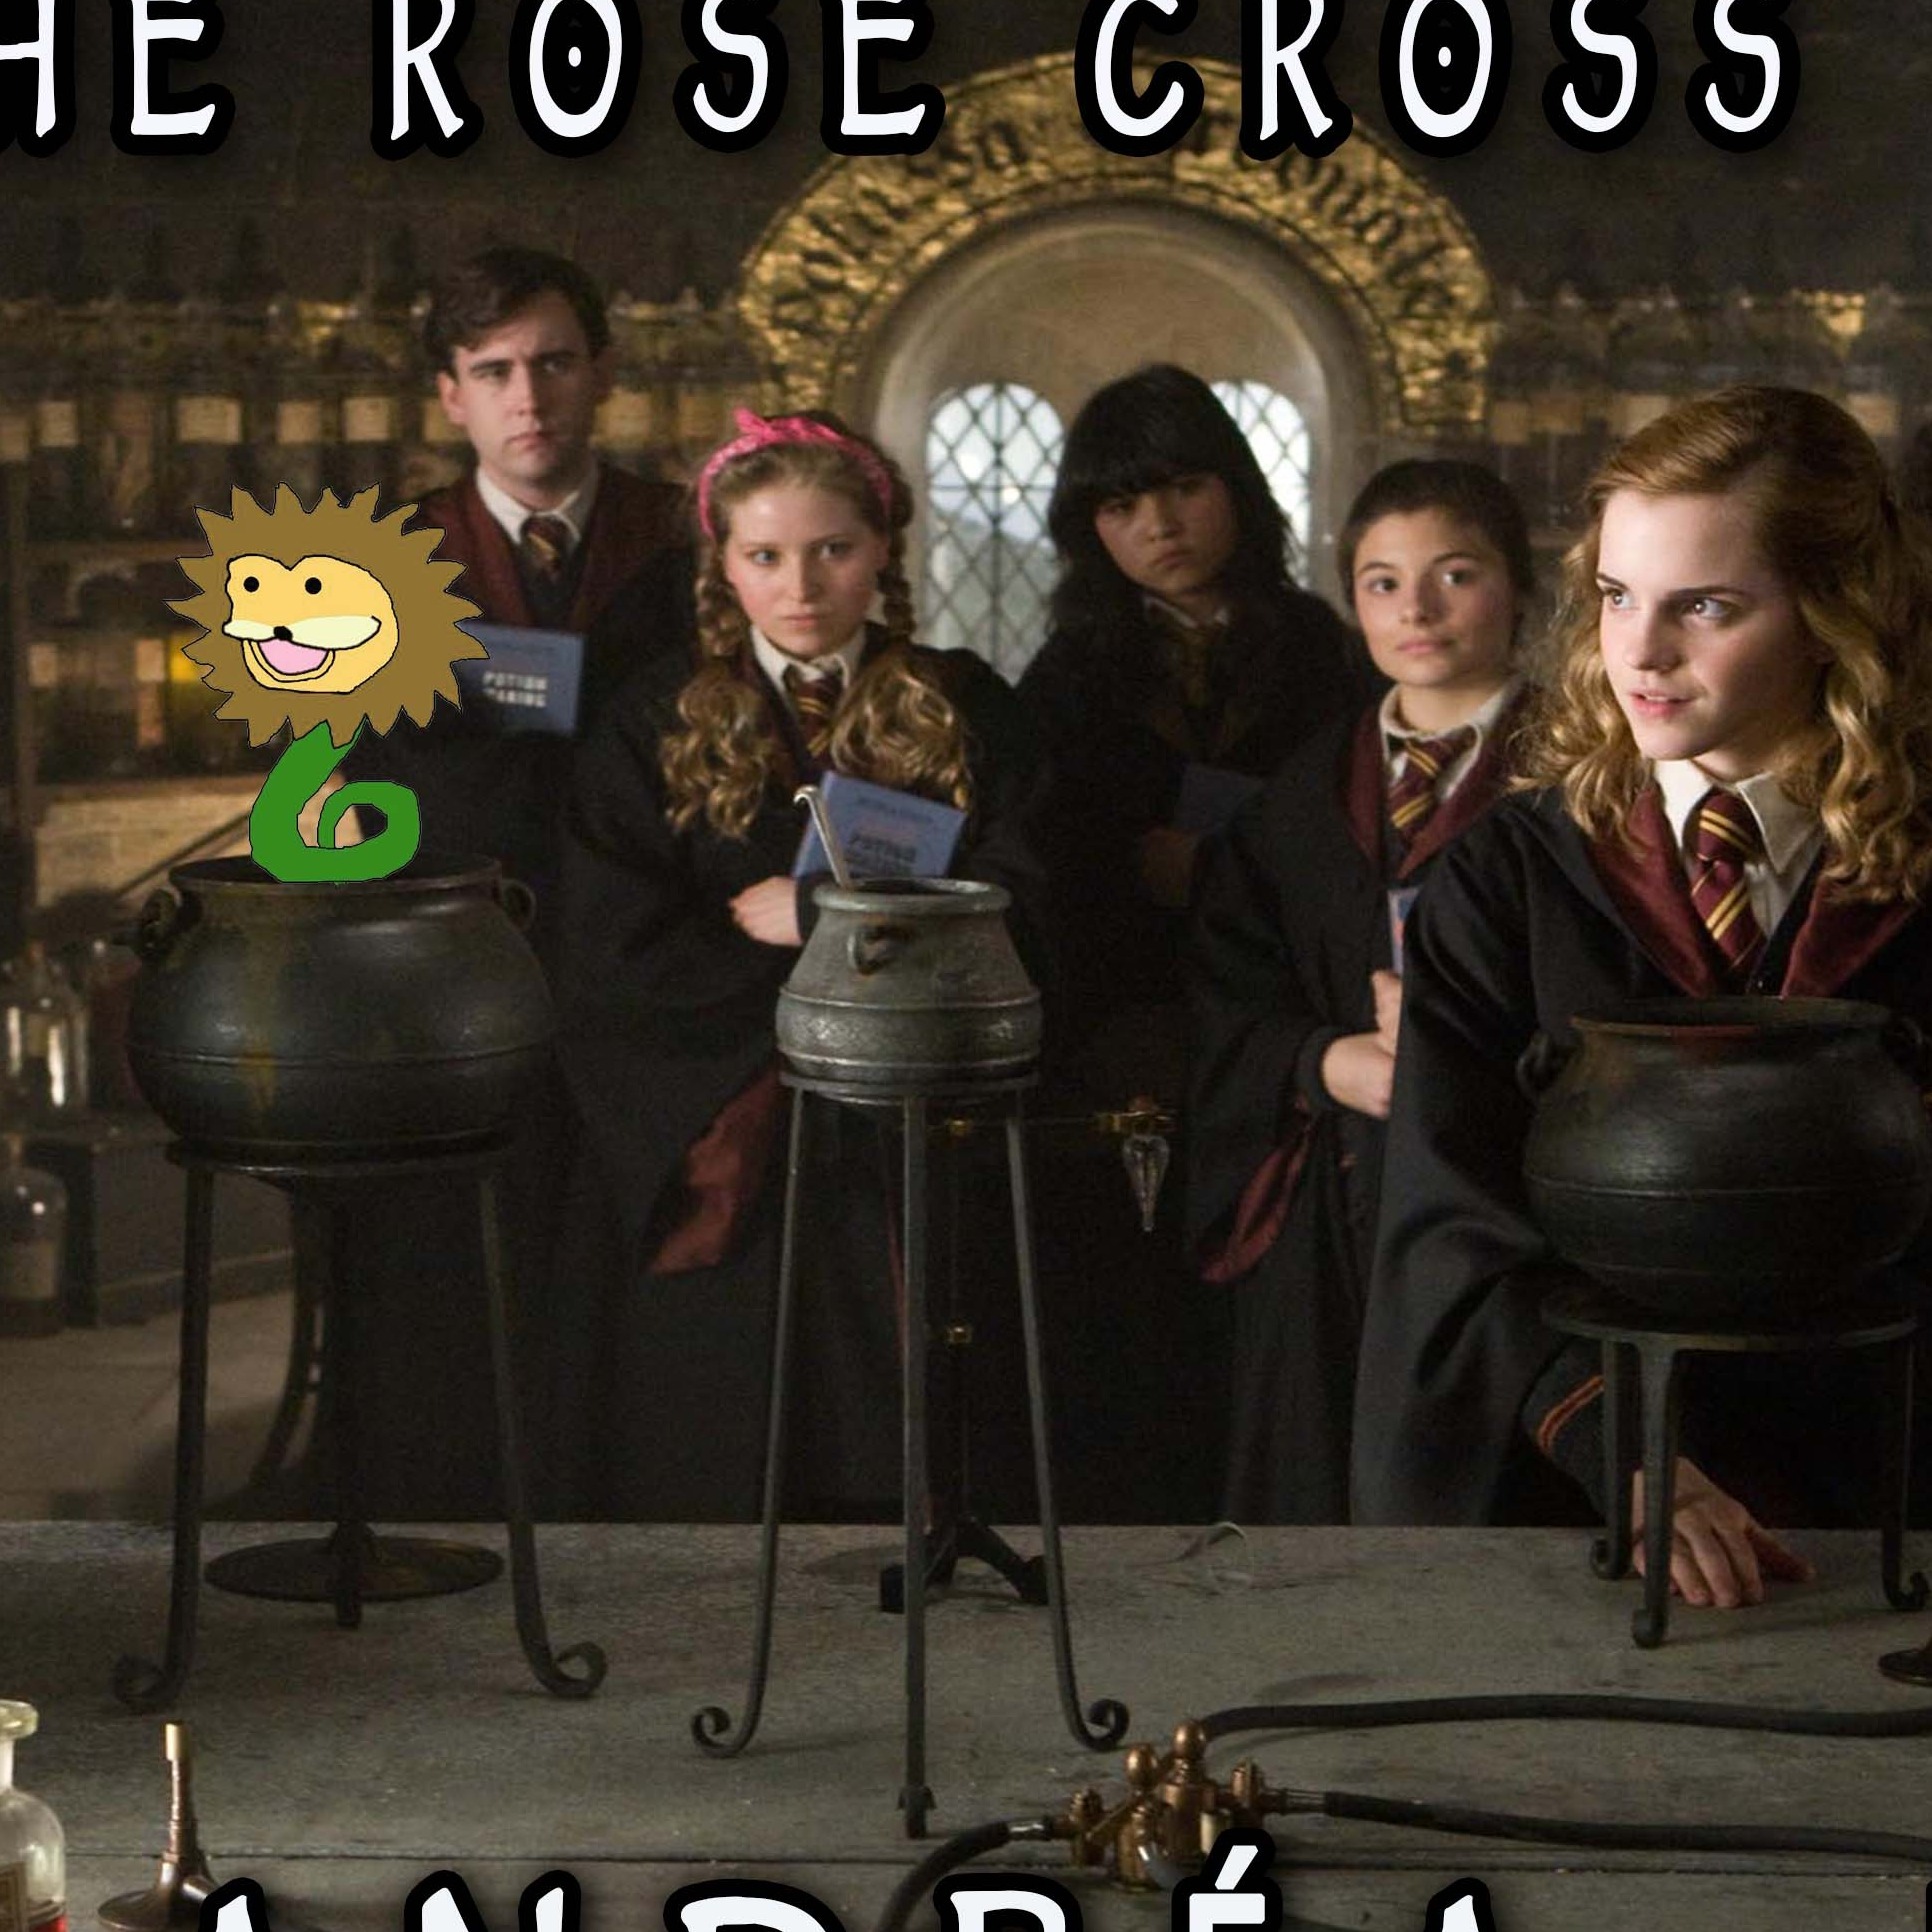 Hans Andréa on Harry Potter, Alchemy, and the Rose Cross